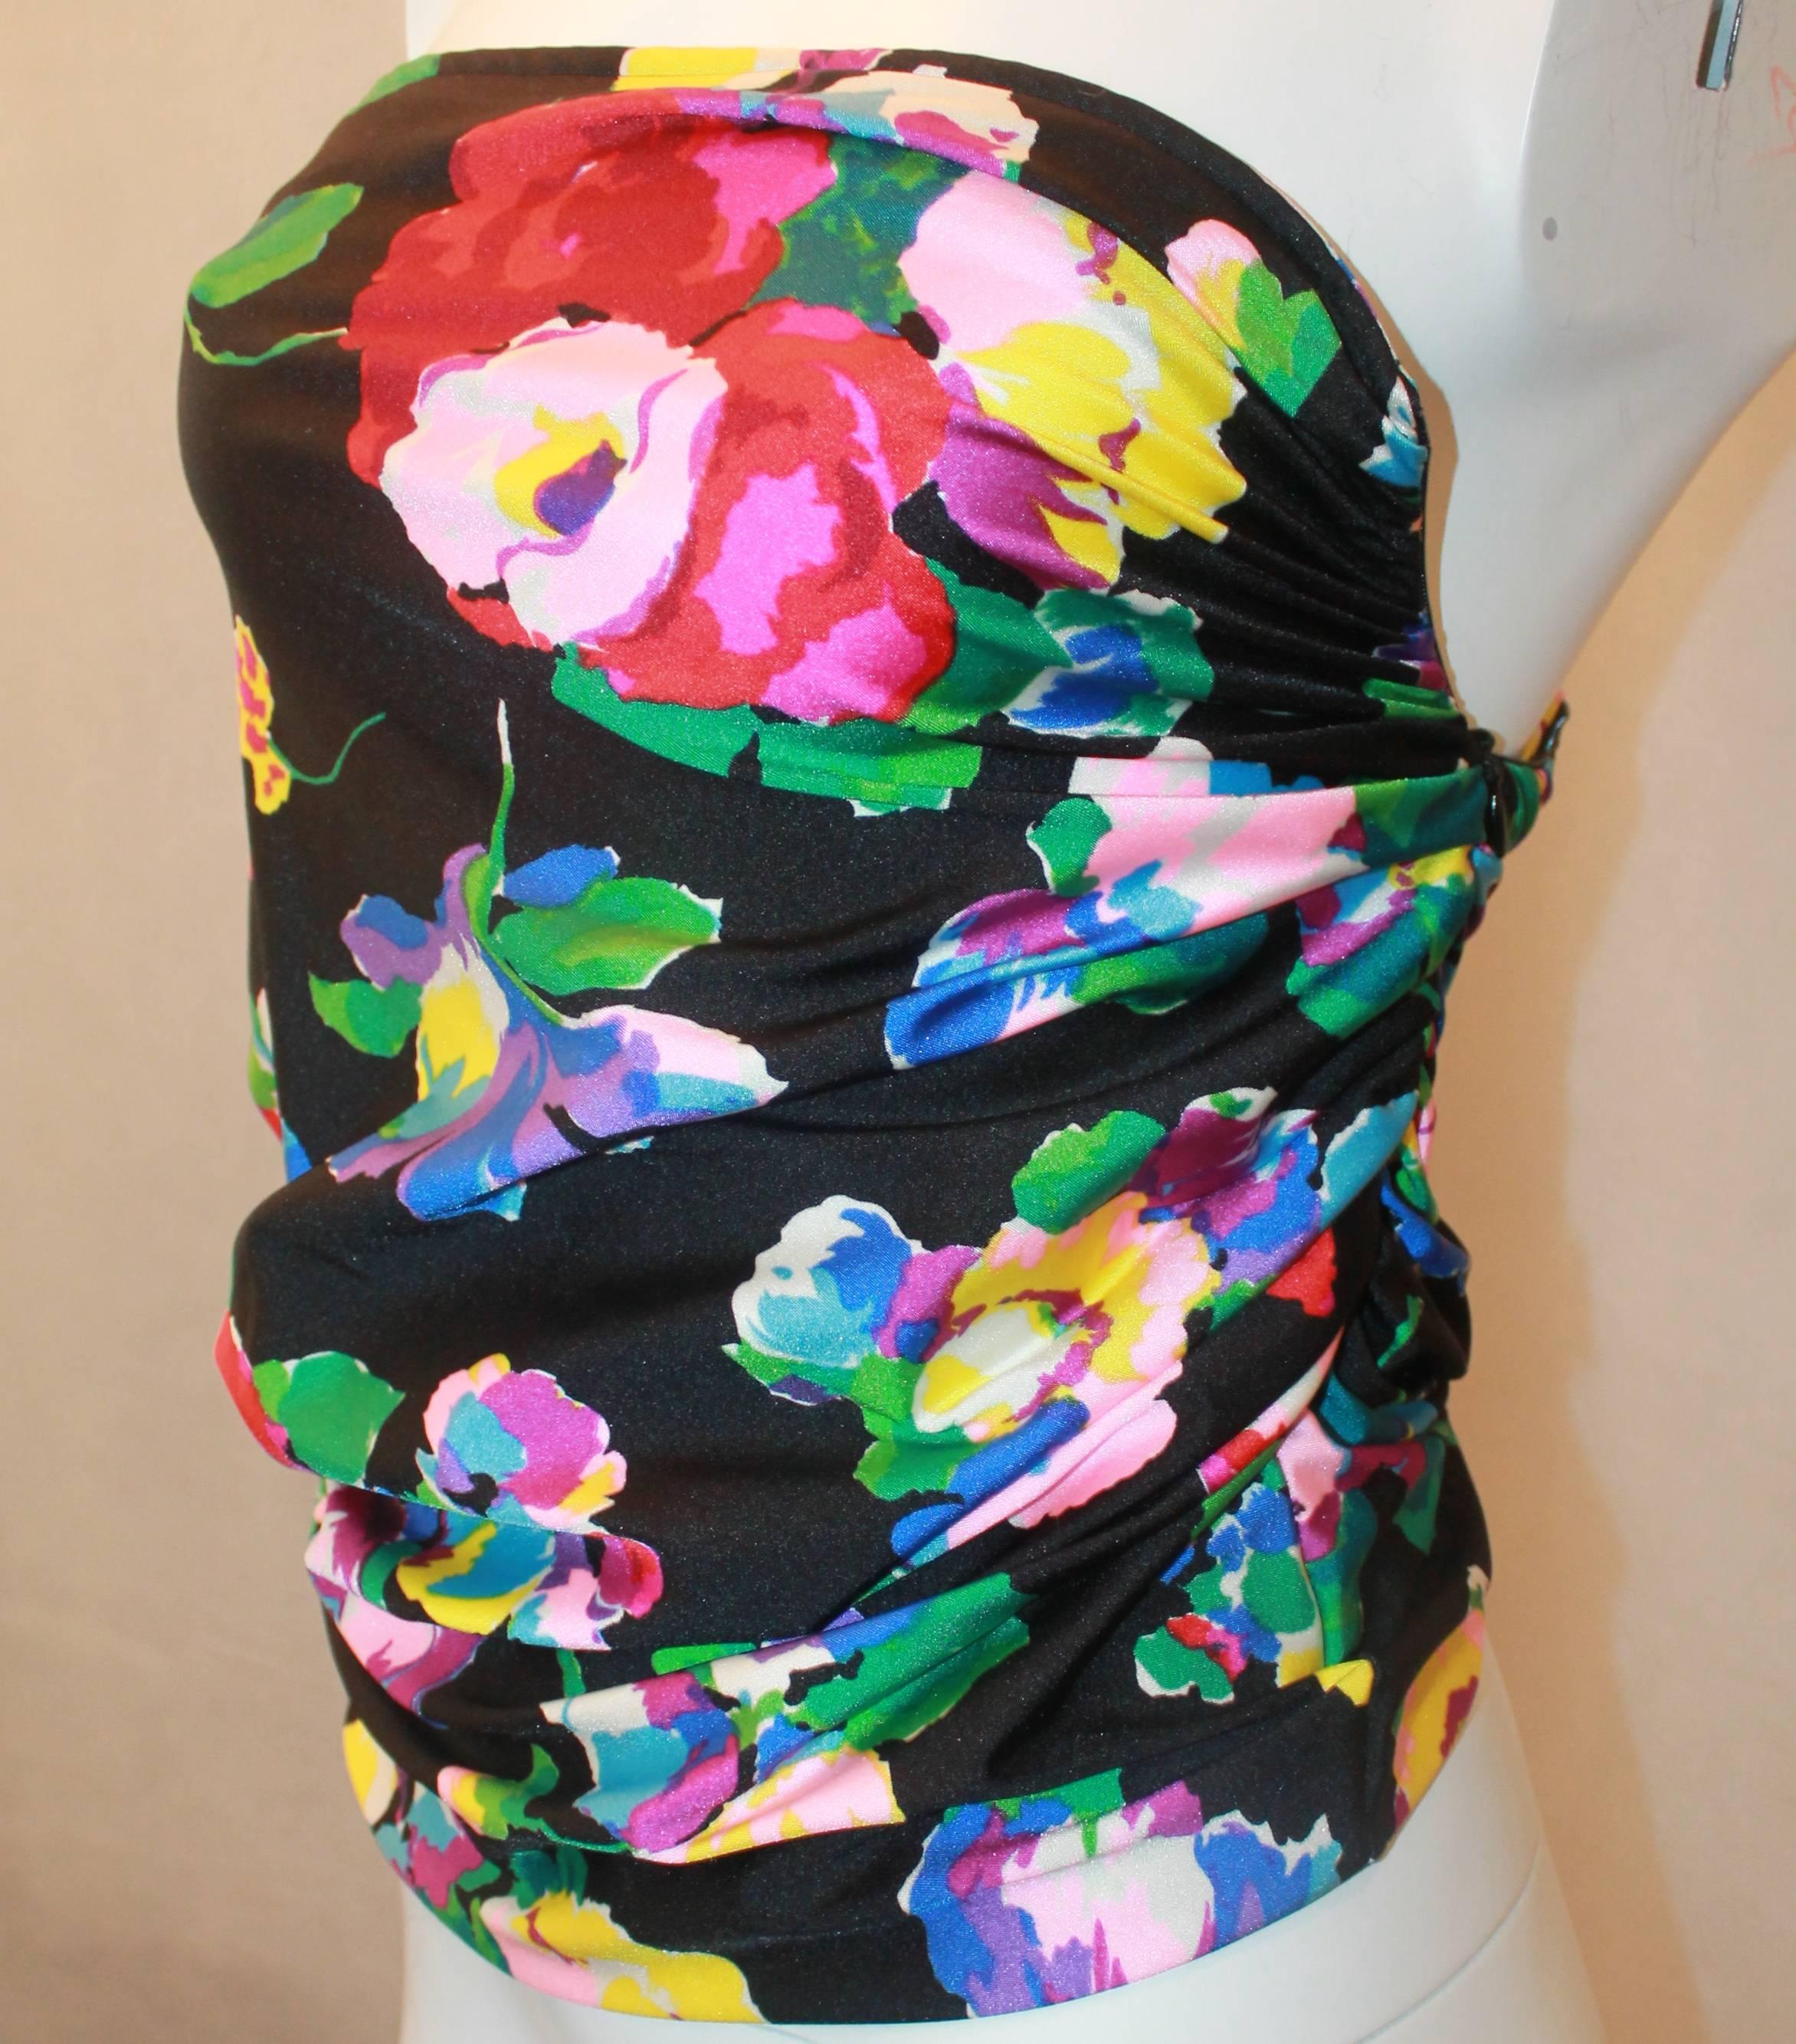 Emanuel Ungaro Black Strapless Ruched Top with Multicolor Flowers - M. This top is in excellent vintage condition with light wear. The colors on the top include purple, yellow, red, green, blue, and white. It has a side zipper and is a jersey